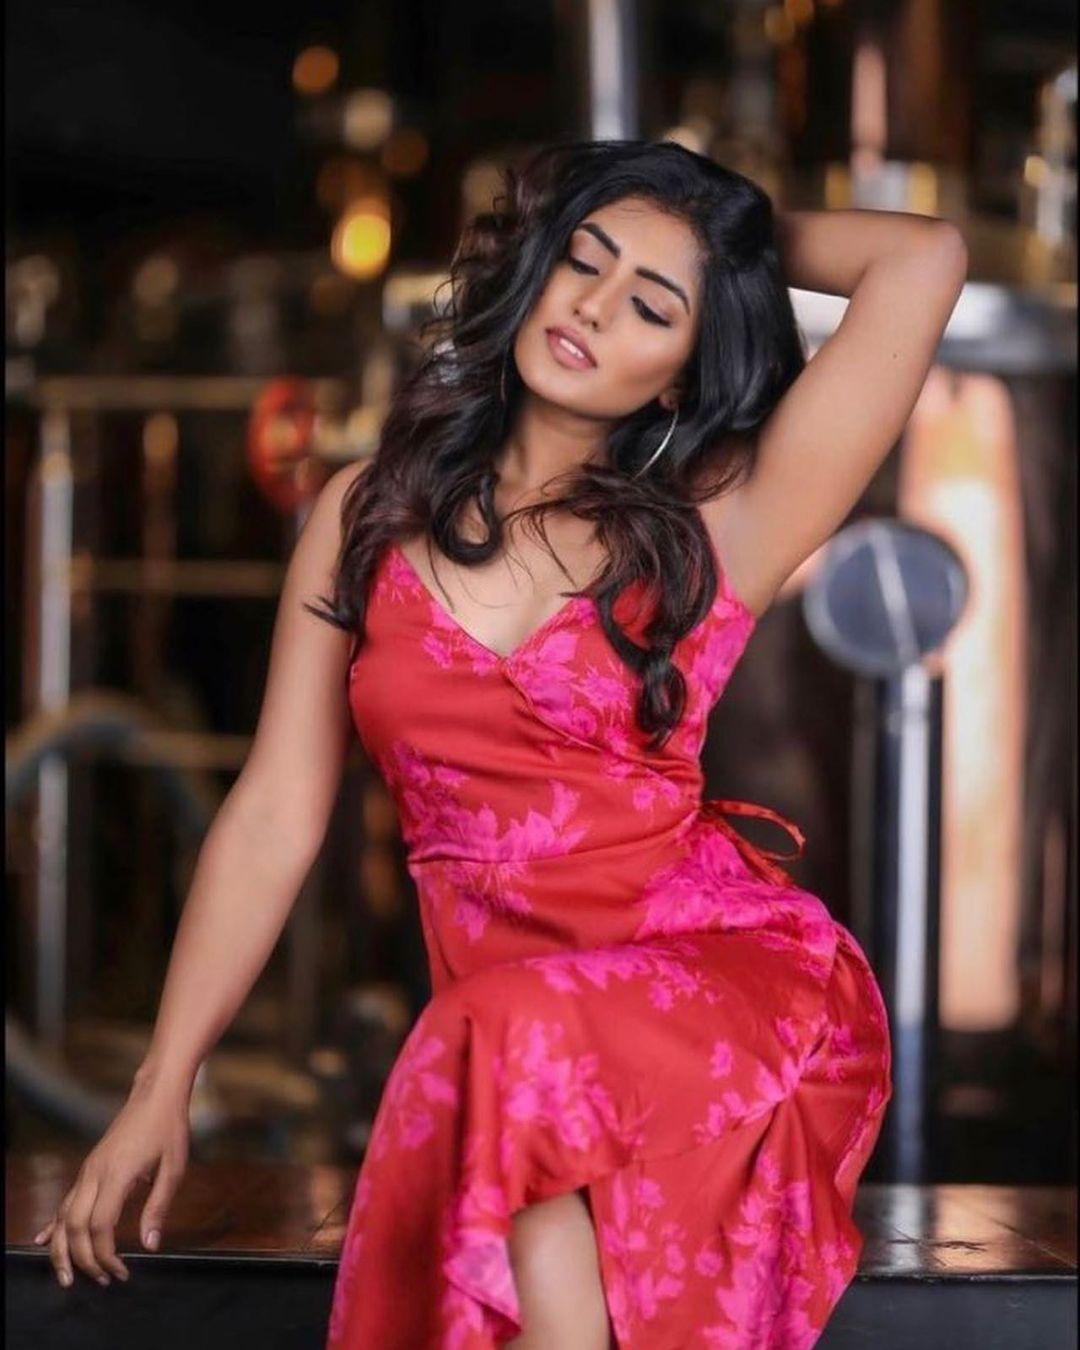 Esha Rebba Ned Sex - Red dress hot photos gallery | Eesha Rebba looking very glamorous photos  Photos: HD Images, Pictures, Stills, First Look Posters of Red dress hot  photos gallery | Eesha Rebba looking very glamorous